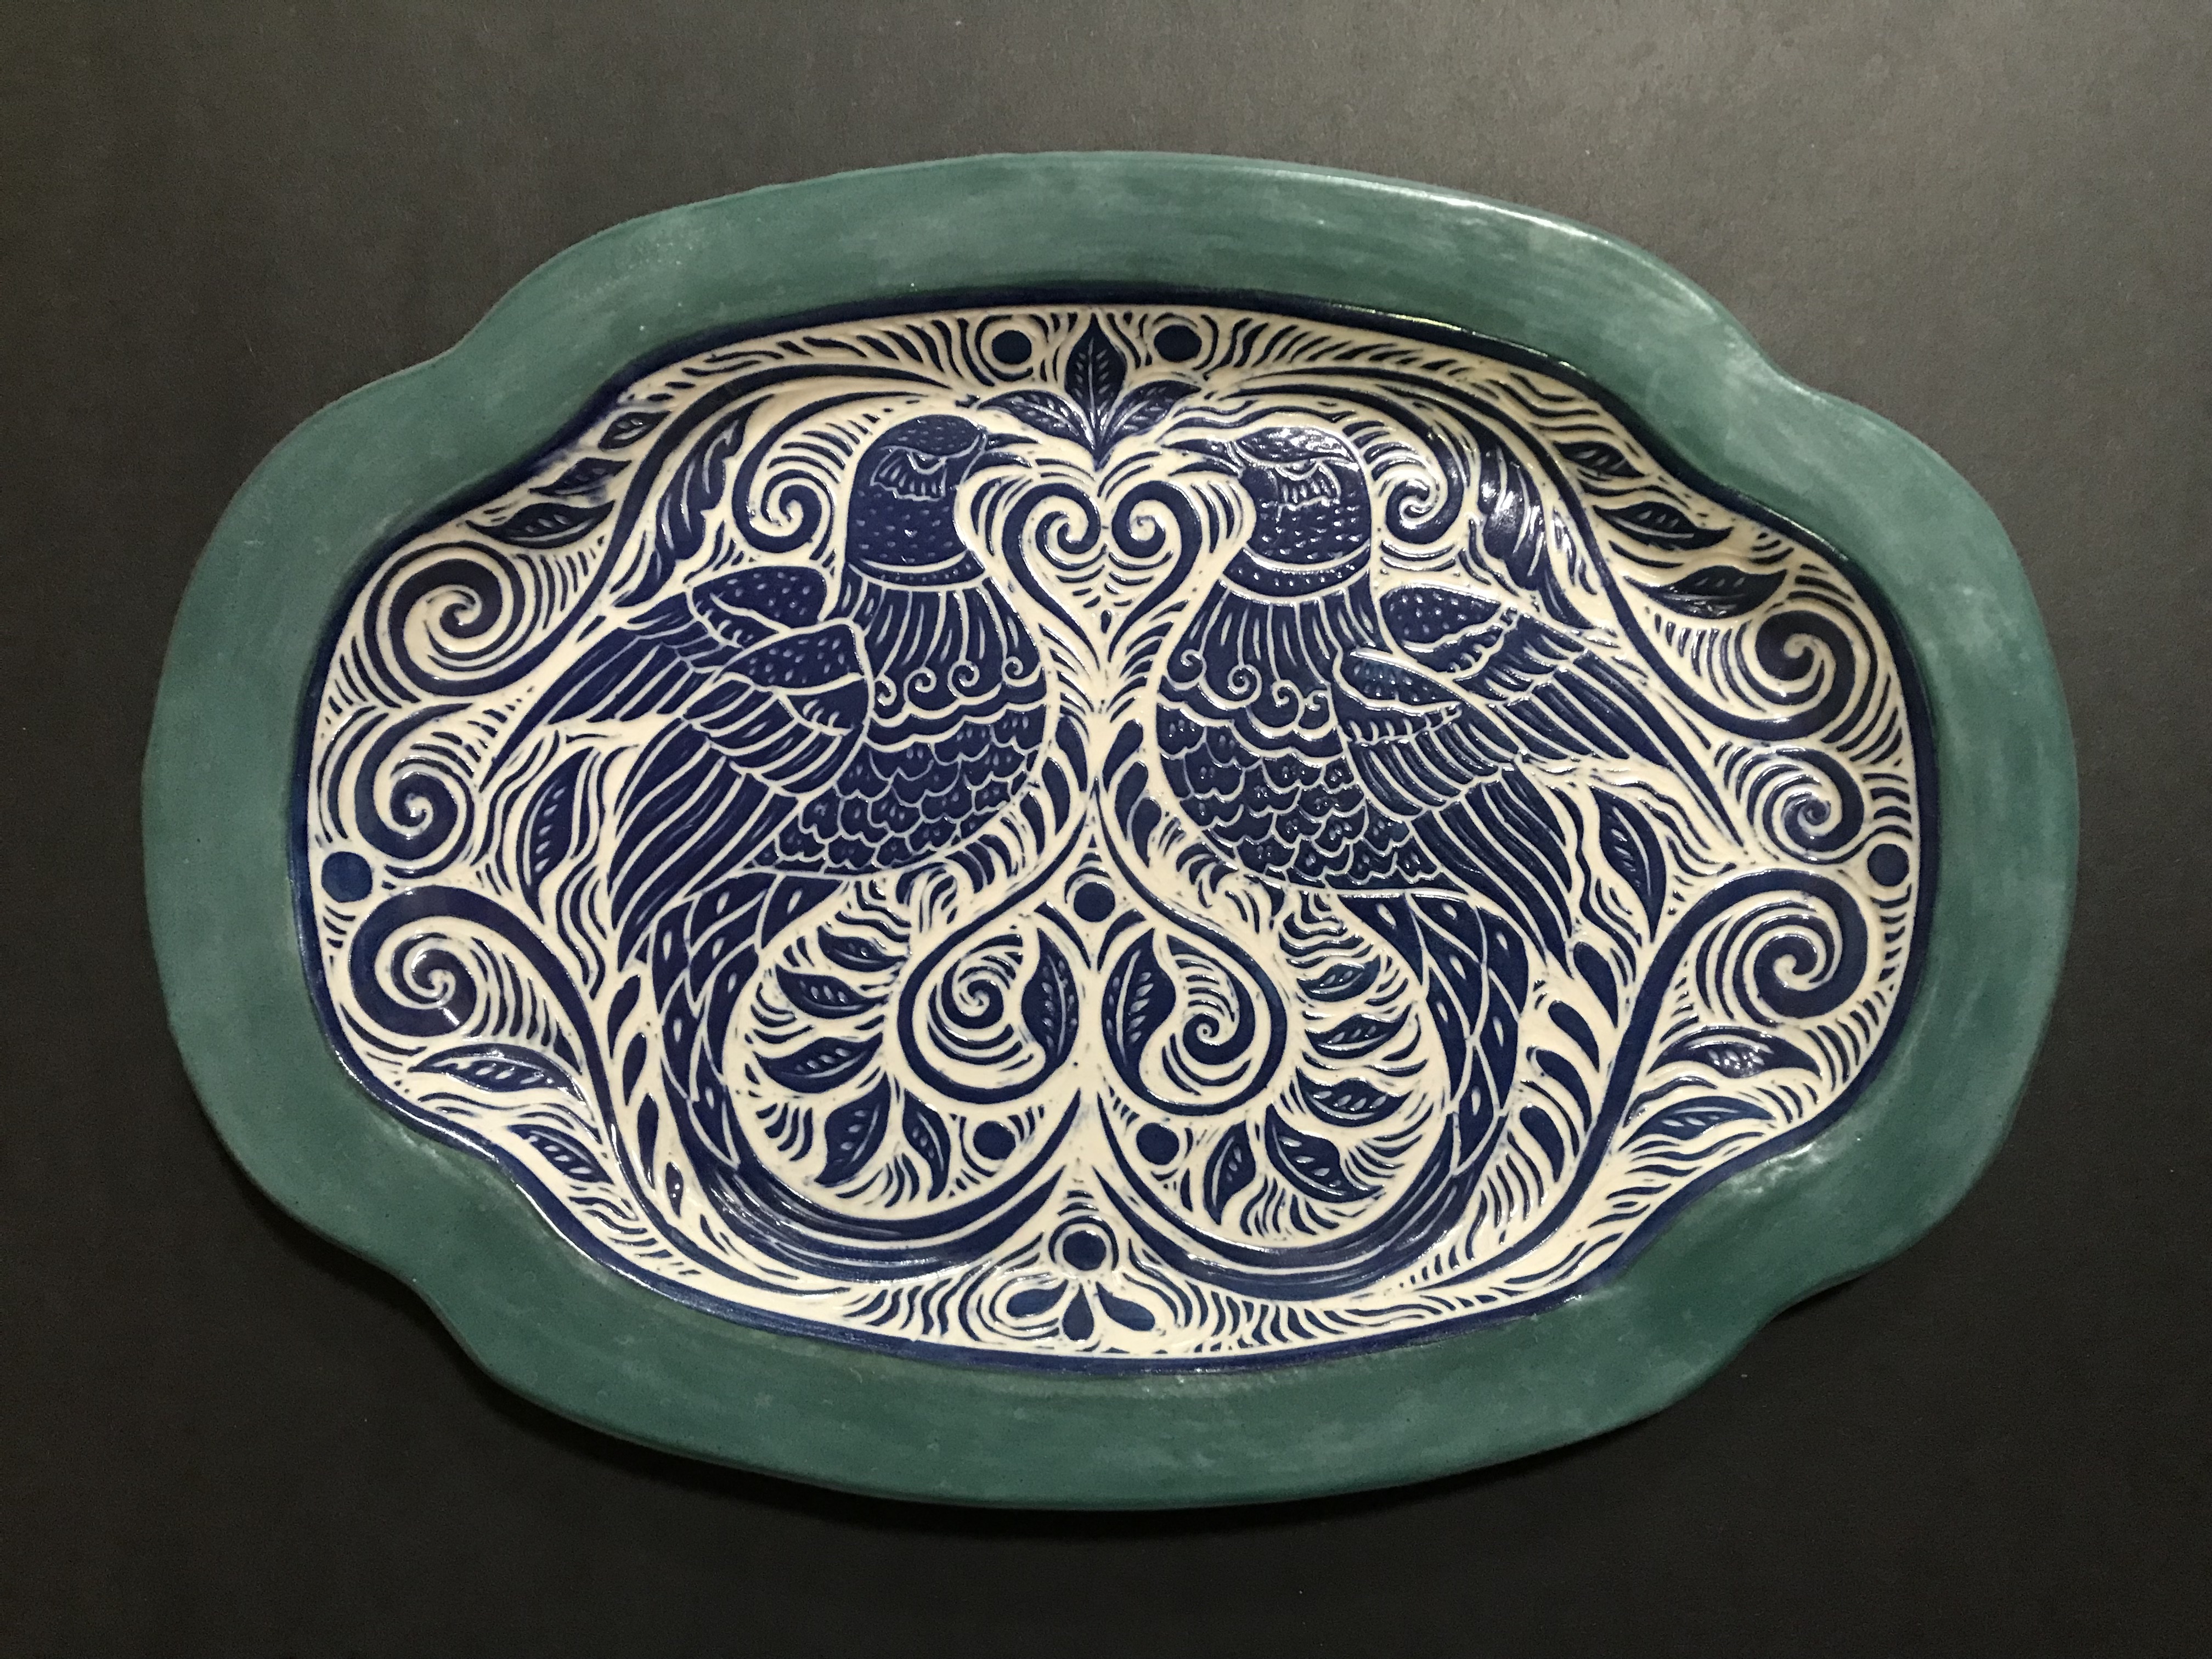 Ceramic Serving Platter in Cobalt Blue, White, and Turquoise with Stylized Lovebird Design